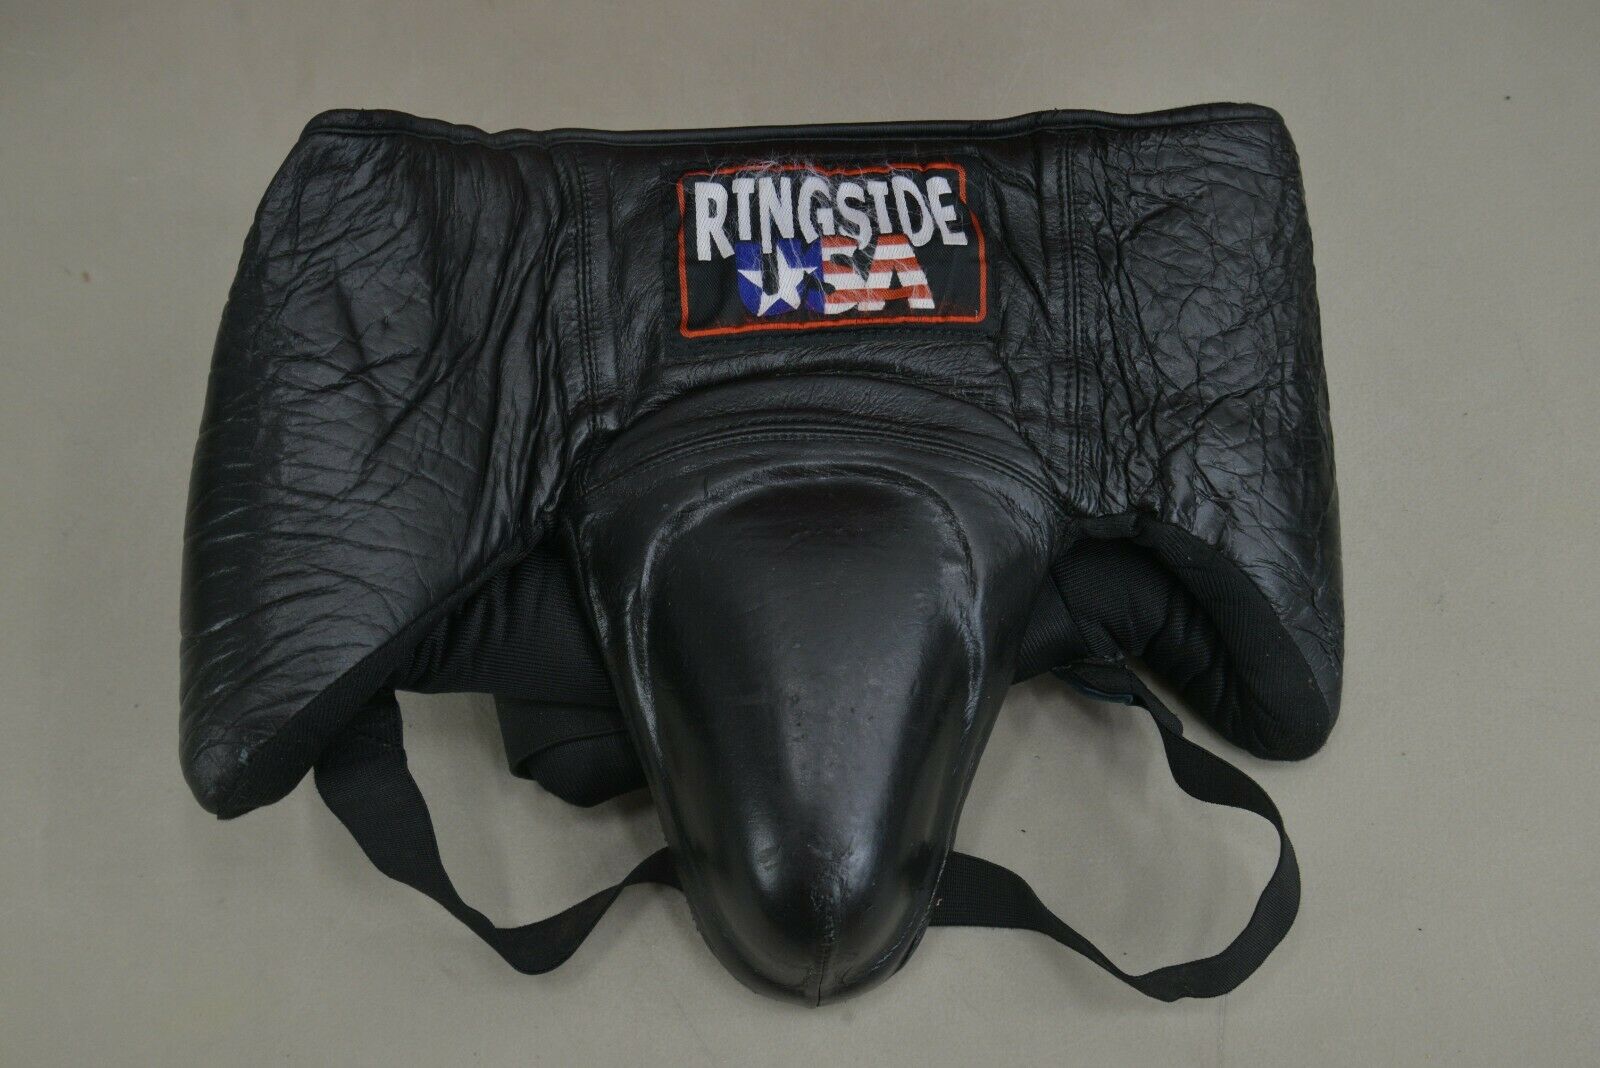 Ringside Boxing Training Gear Martial Arts MMA Fight Gear Size Large 24153 N11 